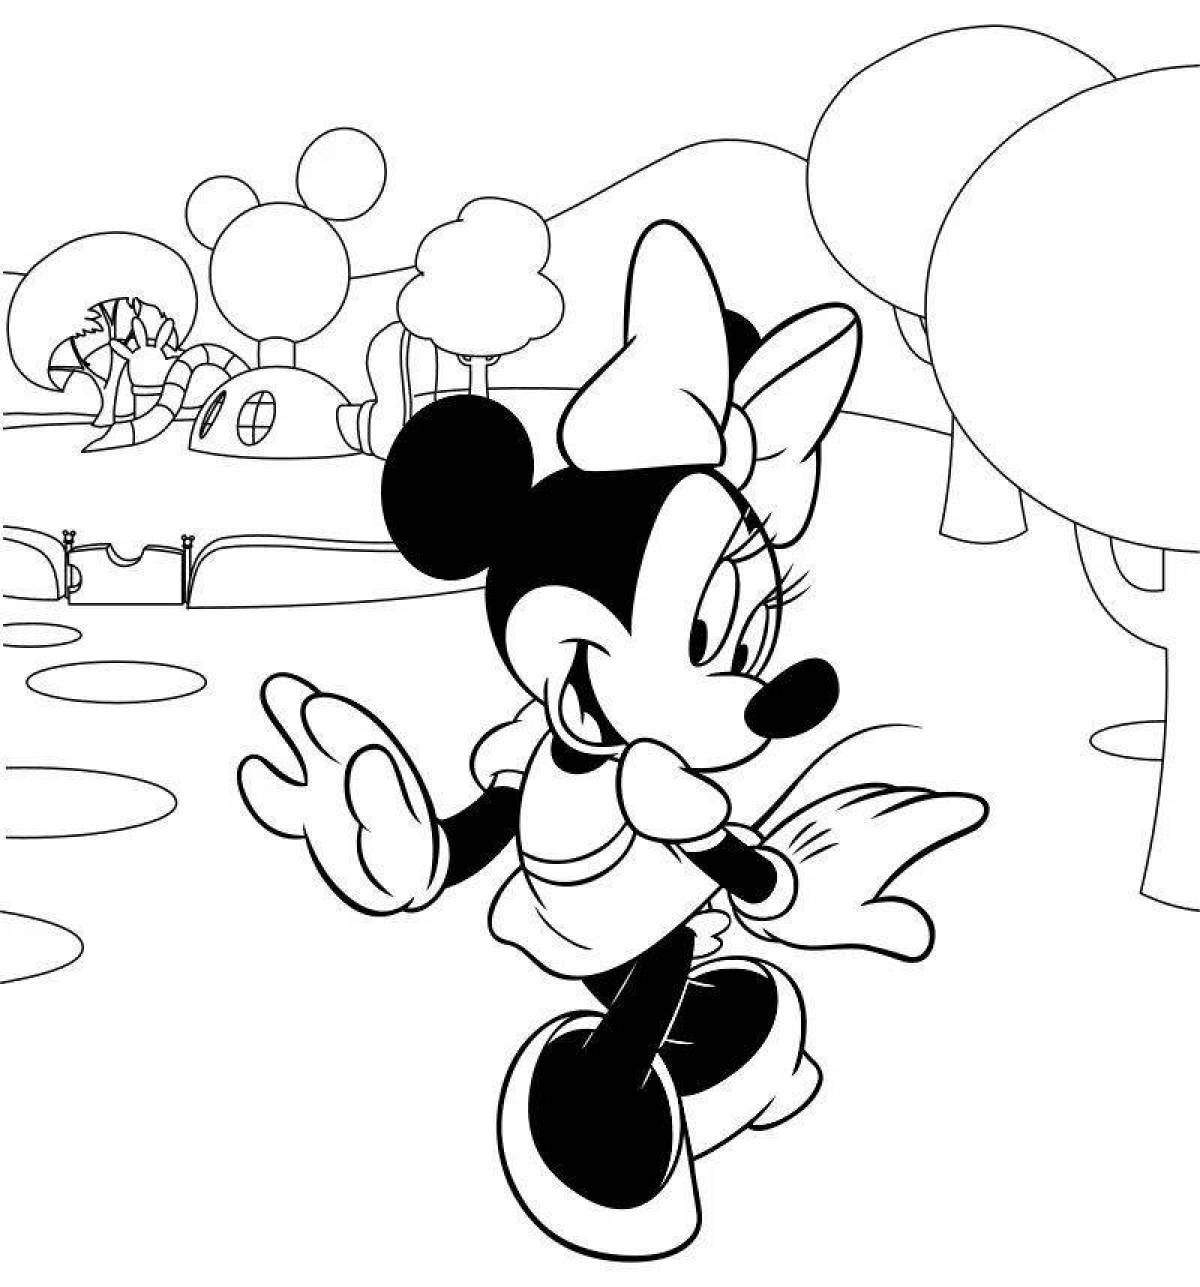 Adorable mouse coloring book